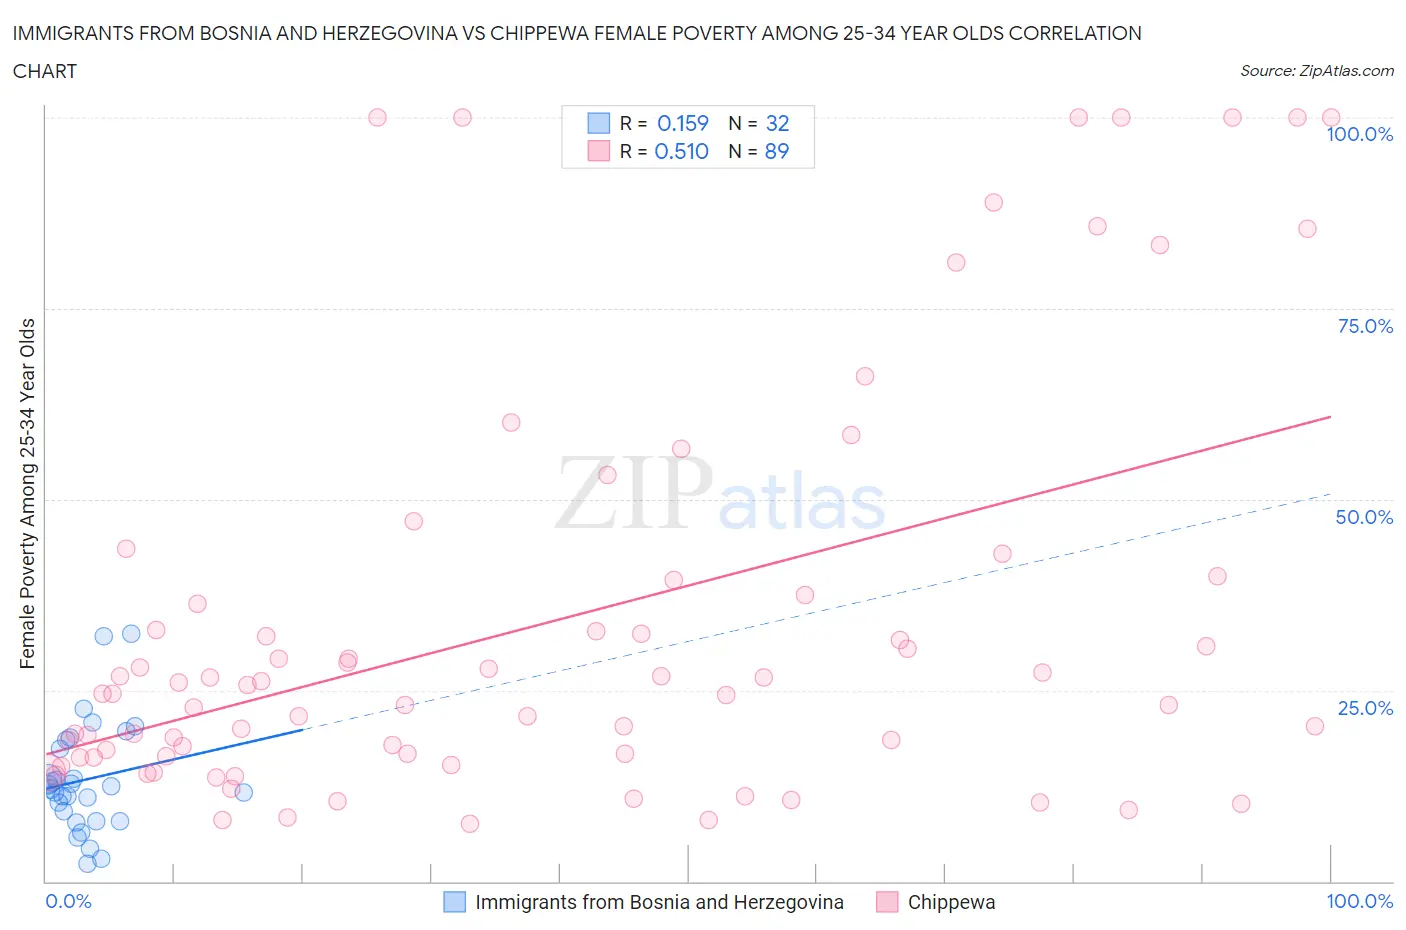 Immigrants from Bosnia and Herzegovina vs Chippewa Female Poverty Among 25-34 Year Olds